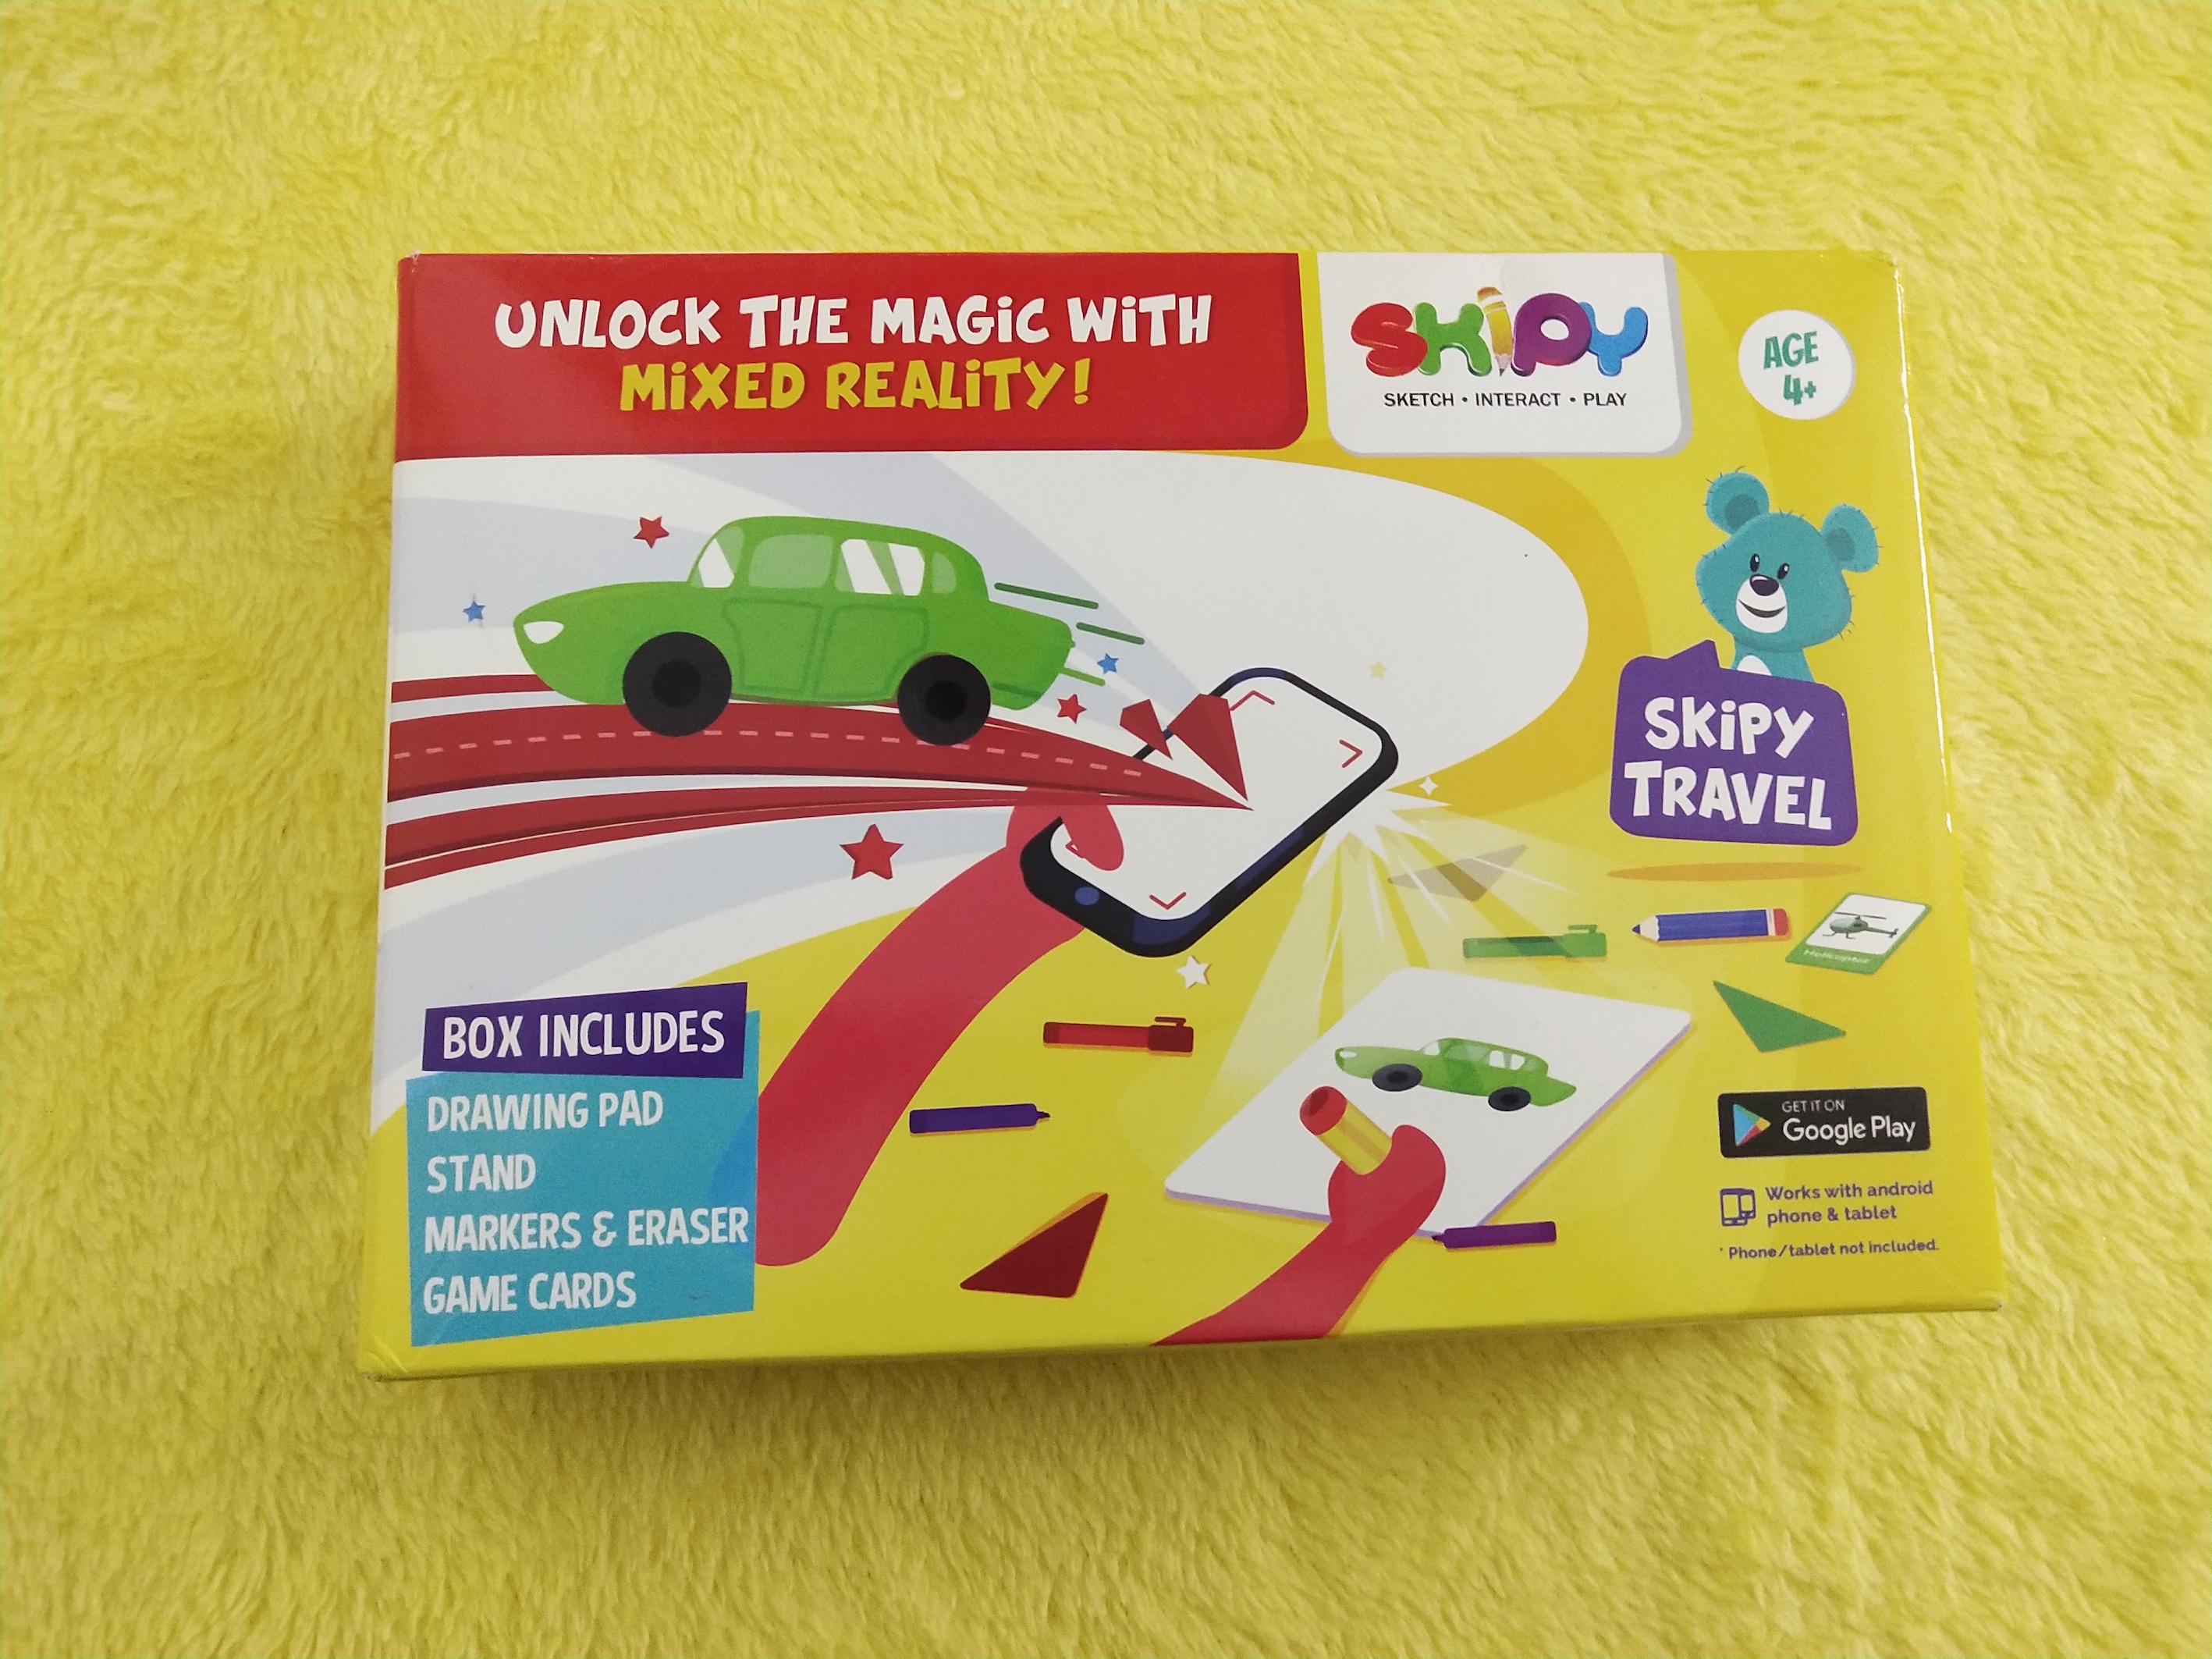 The world is progressing towards Mixed Reality and SKIPY Interactive Kit is one such Interactive Education toy and game for toddlers and kids. #Skipy #SKIPYApp #SkipyKit #Interactivegames #educationaltoys #educationalgames #learningtoys #learninggames #educationalgamesforkids #gamesfortoddlers #educationalgamesfortoddlers